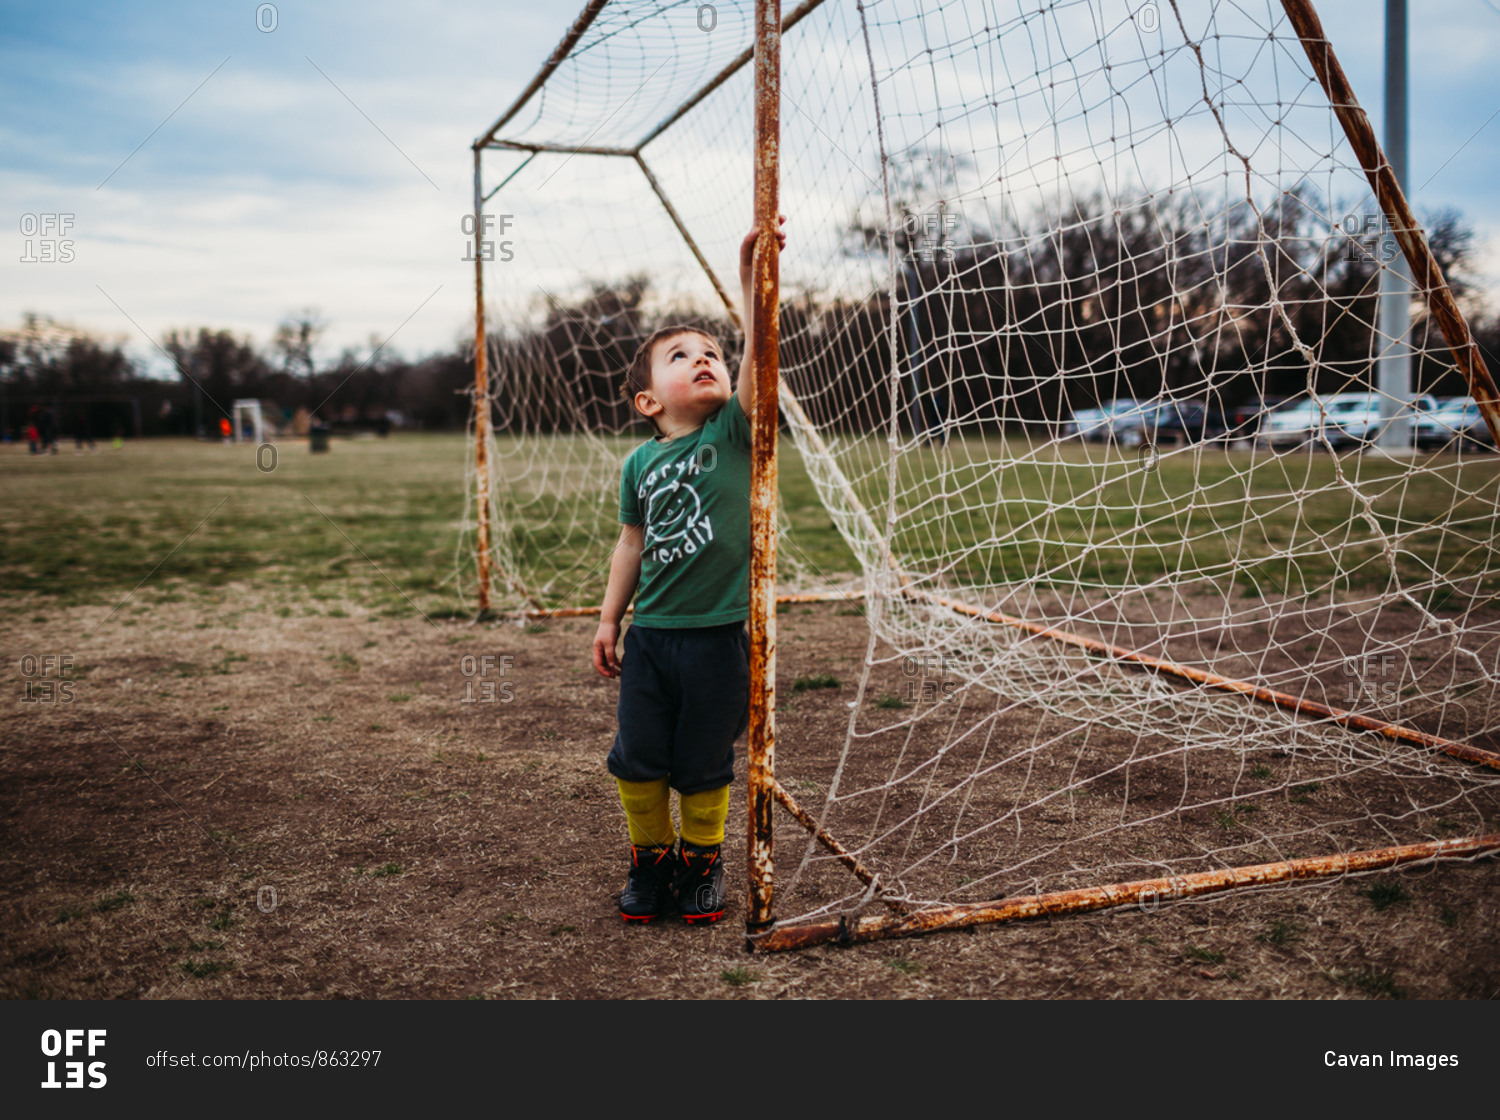 Young boy standing inside soccer goal wearing cleats